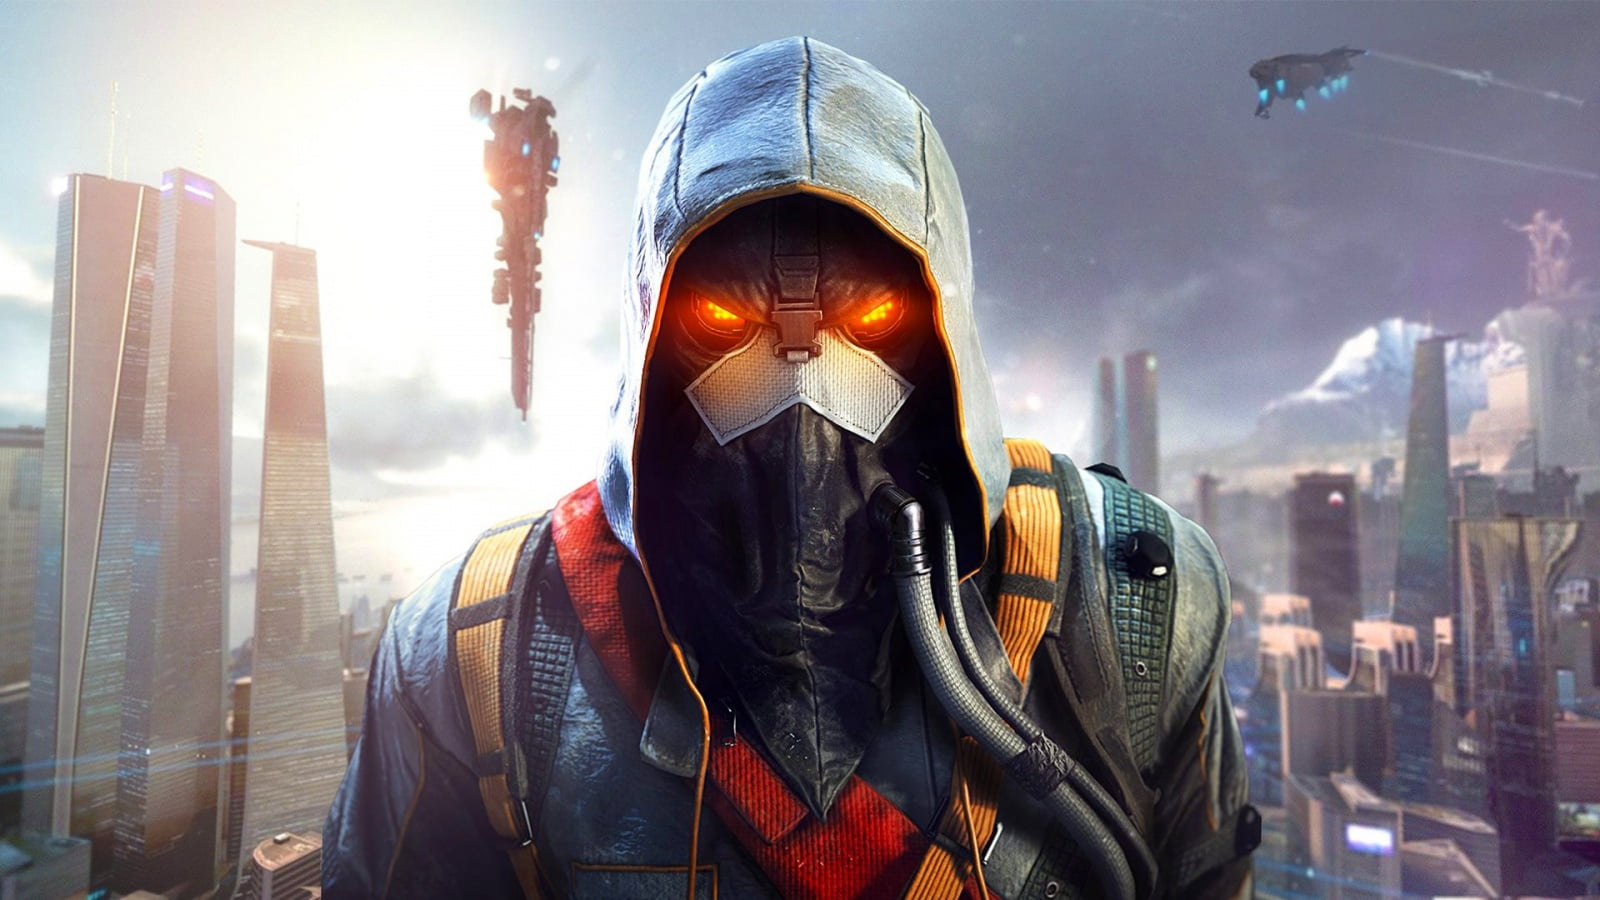 download killzone shadow fall on ps5